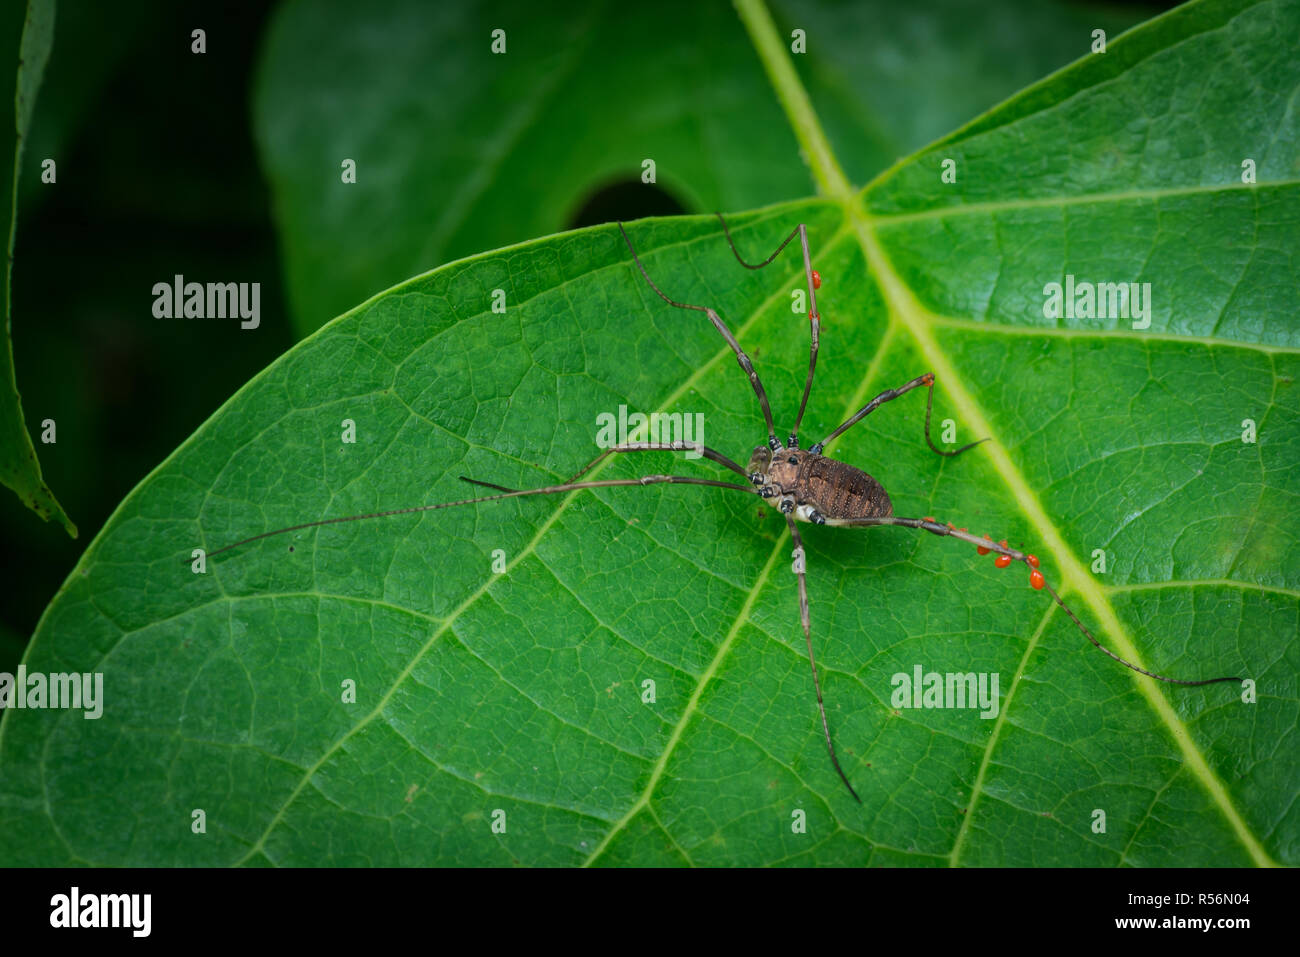 Harvestman, or daddy long legs, with red parasitic mites sucking fluids from its legs. Stock Photo